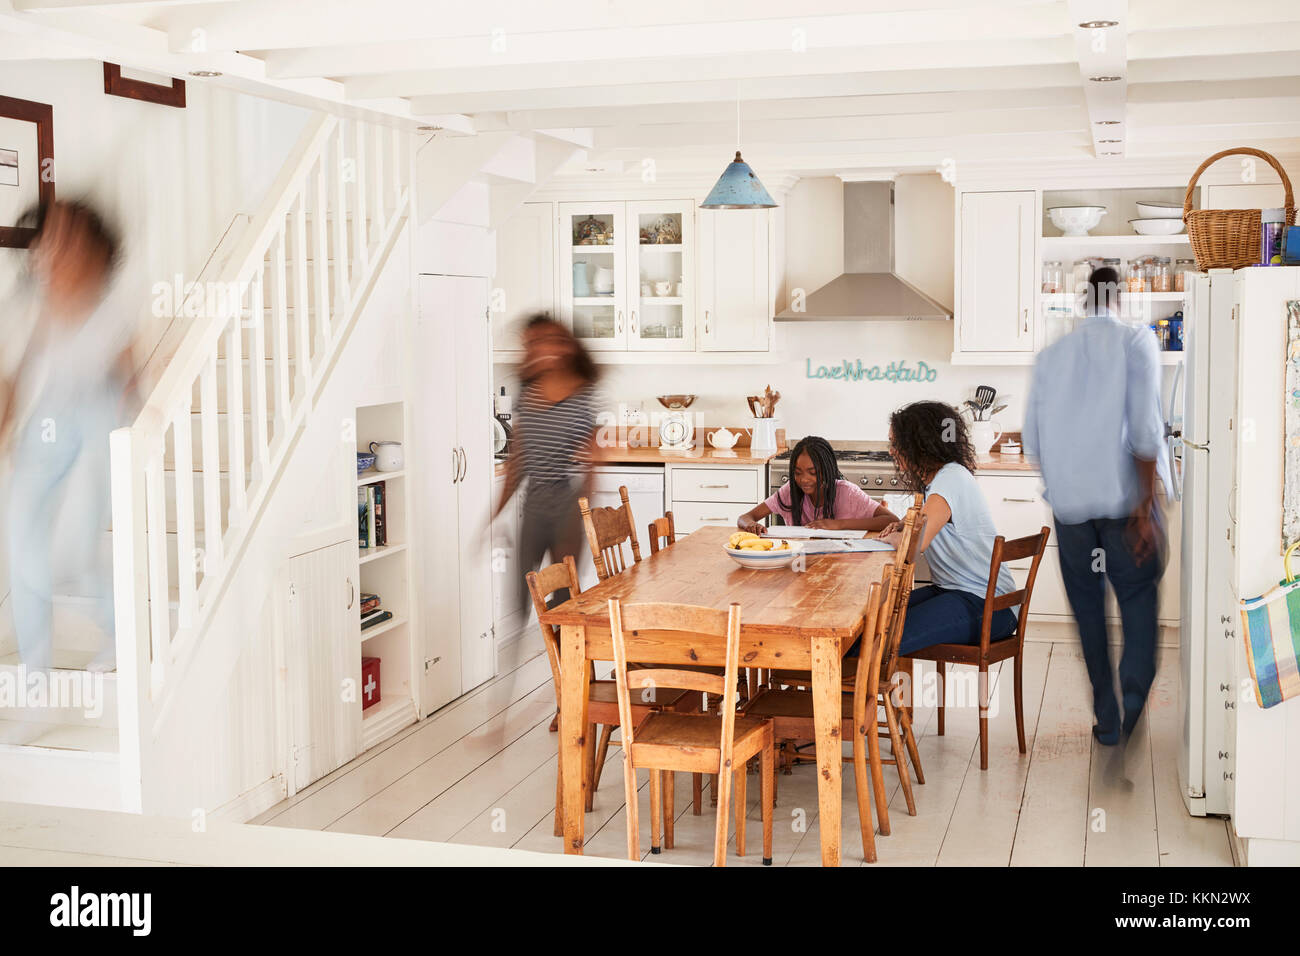 Interior Of Busy Family Home With Blurred Figures Stock Photo